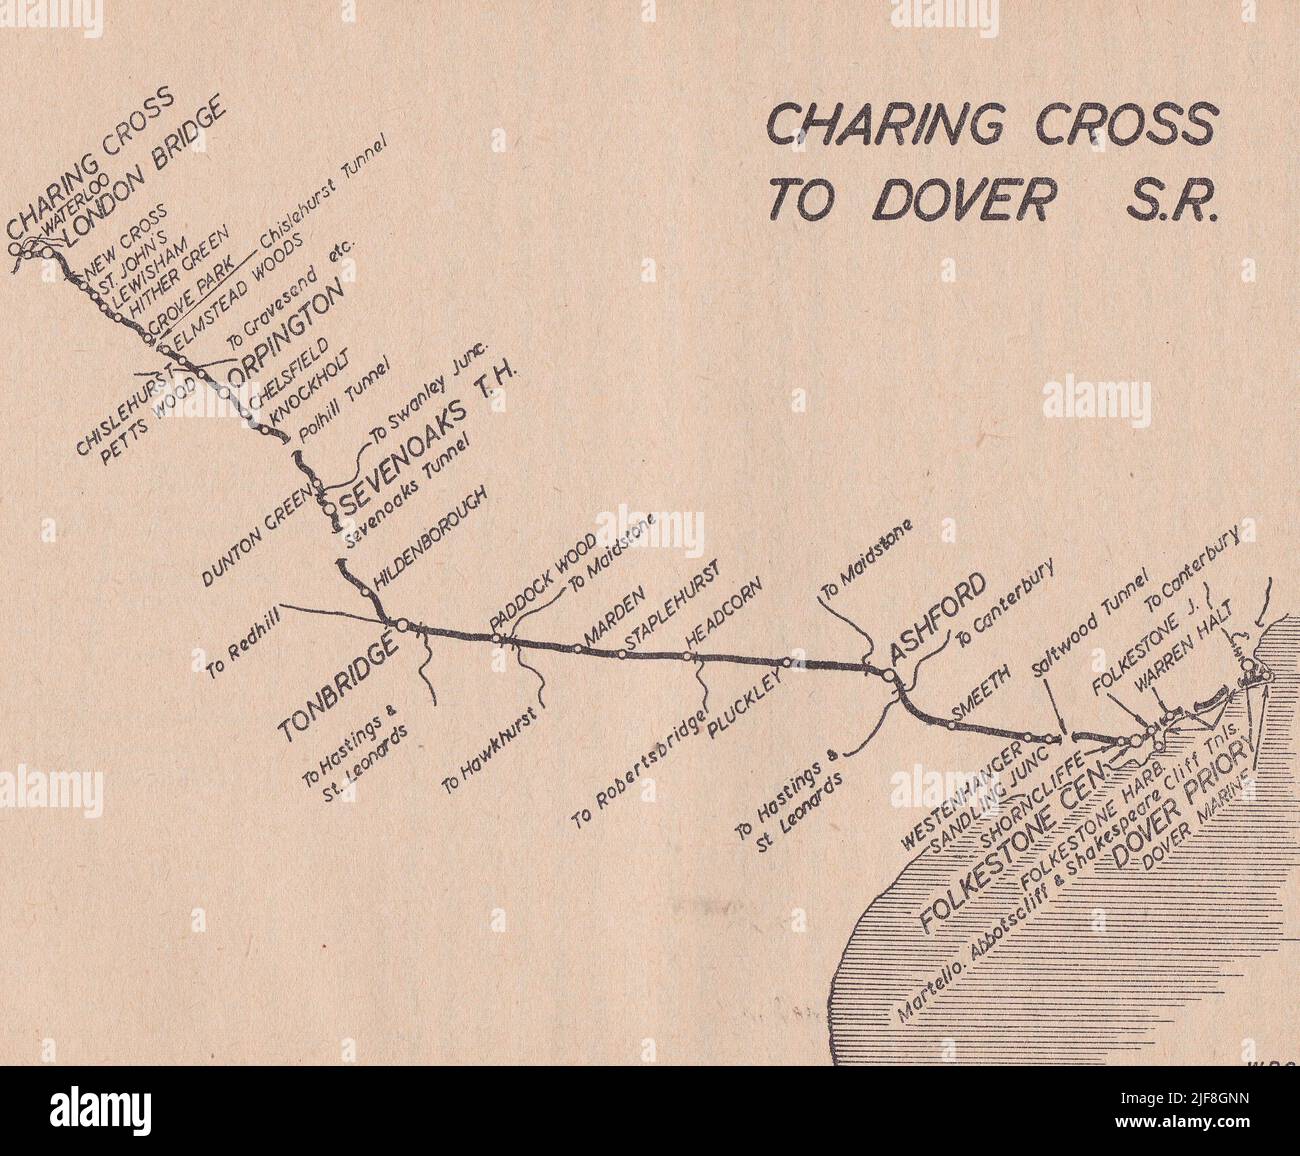 Vintage railway map - Charing Cross to Dover S.R. Stock Photo